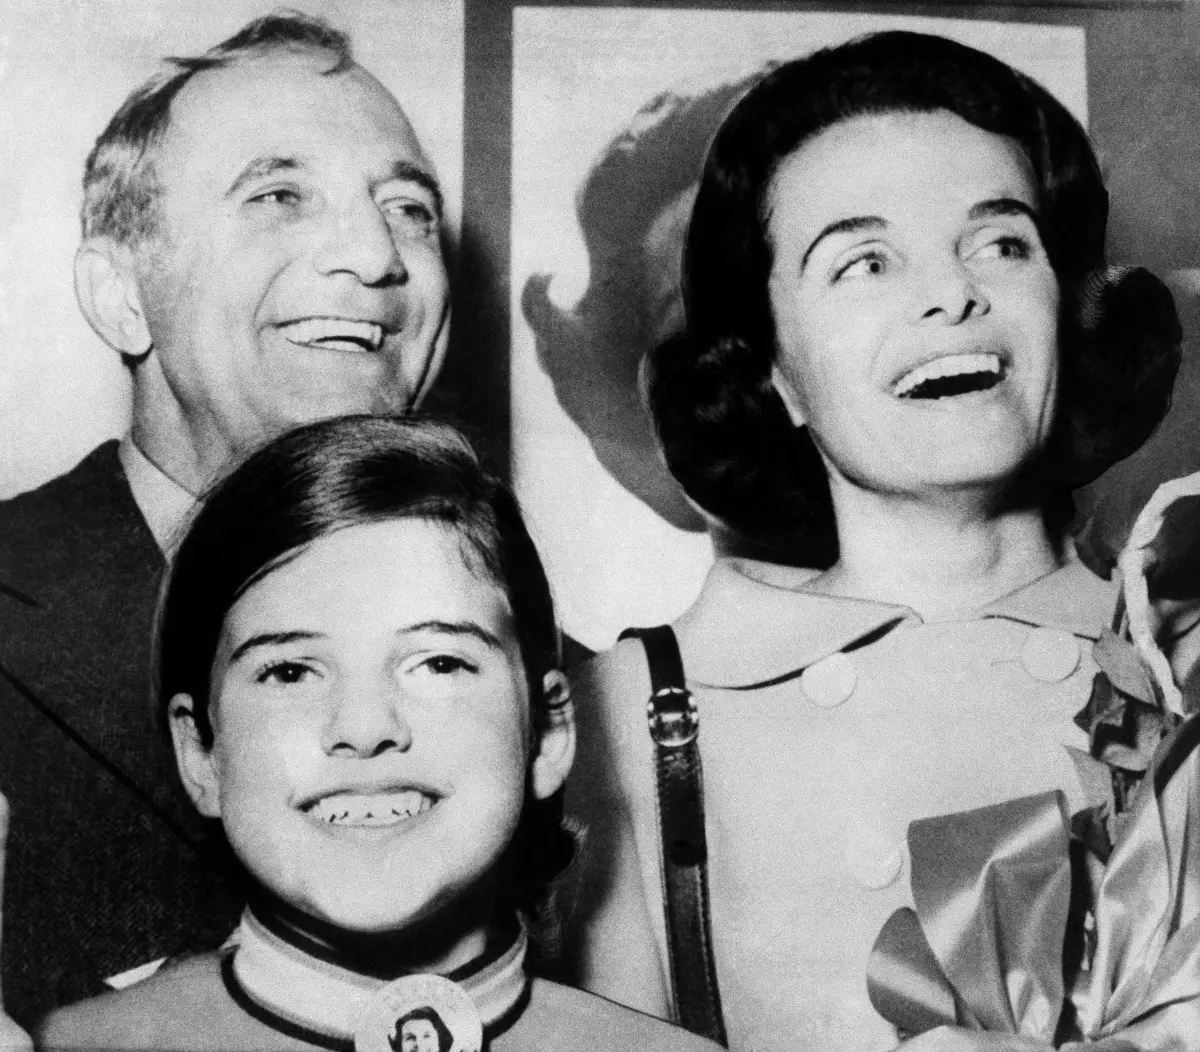 Dianne Feinstein and her family following her election to the
San Francisco Board of Supervisors in 1969 | Photo from Associated Press